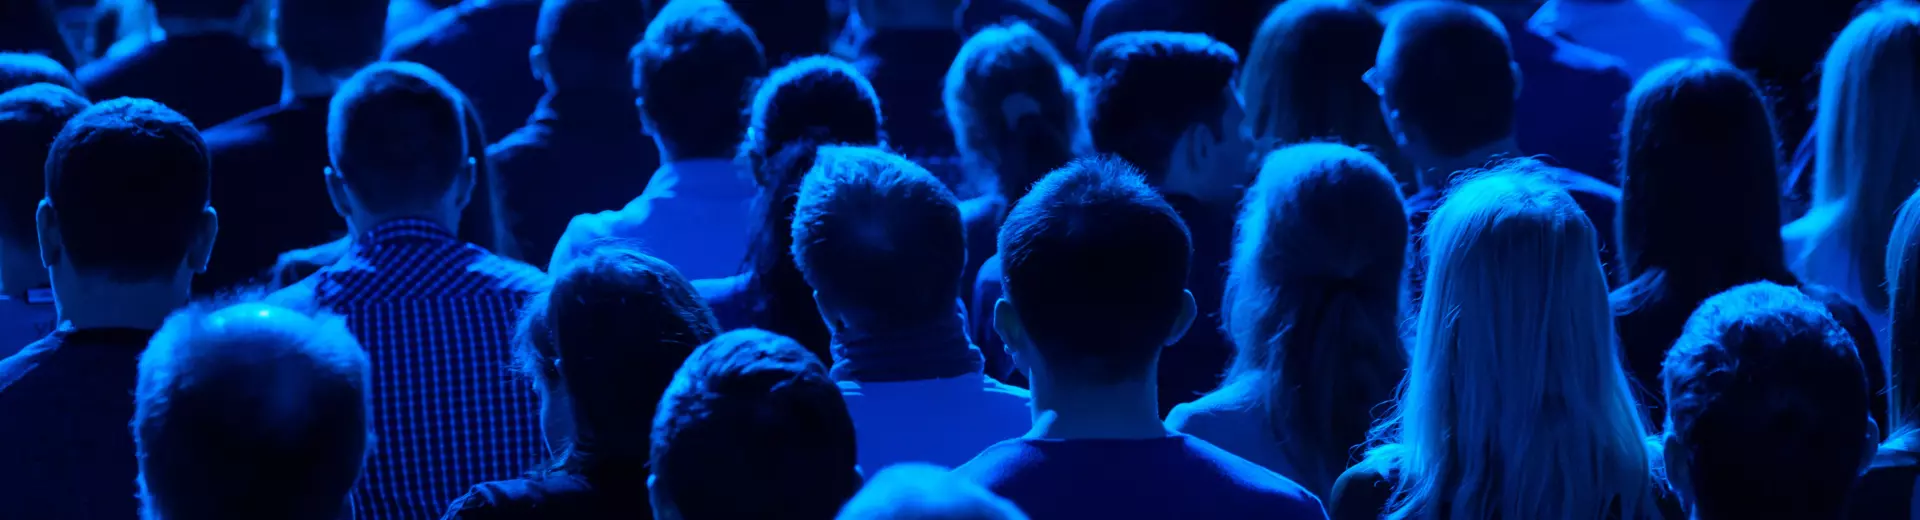 Photo of the back of heads of a crowd of people sitting in rows of chairs in a blue light 